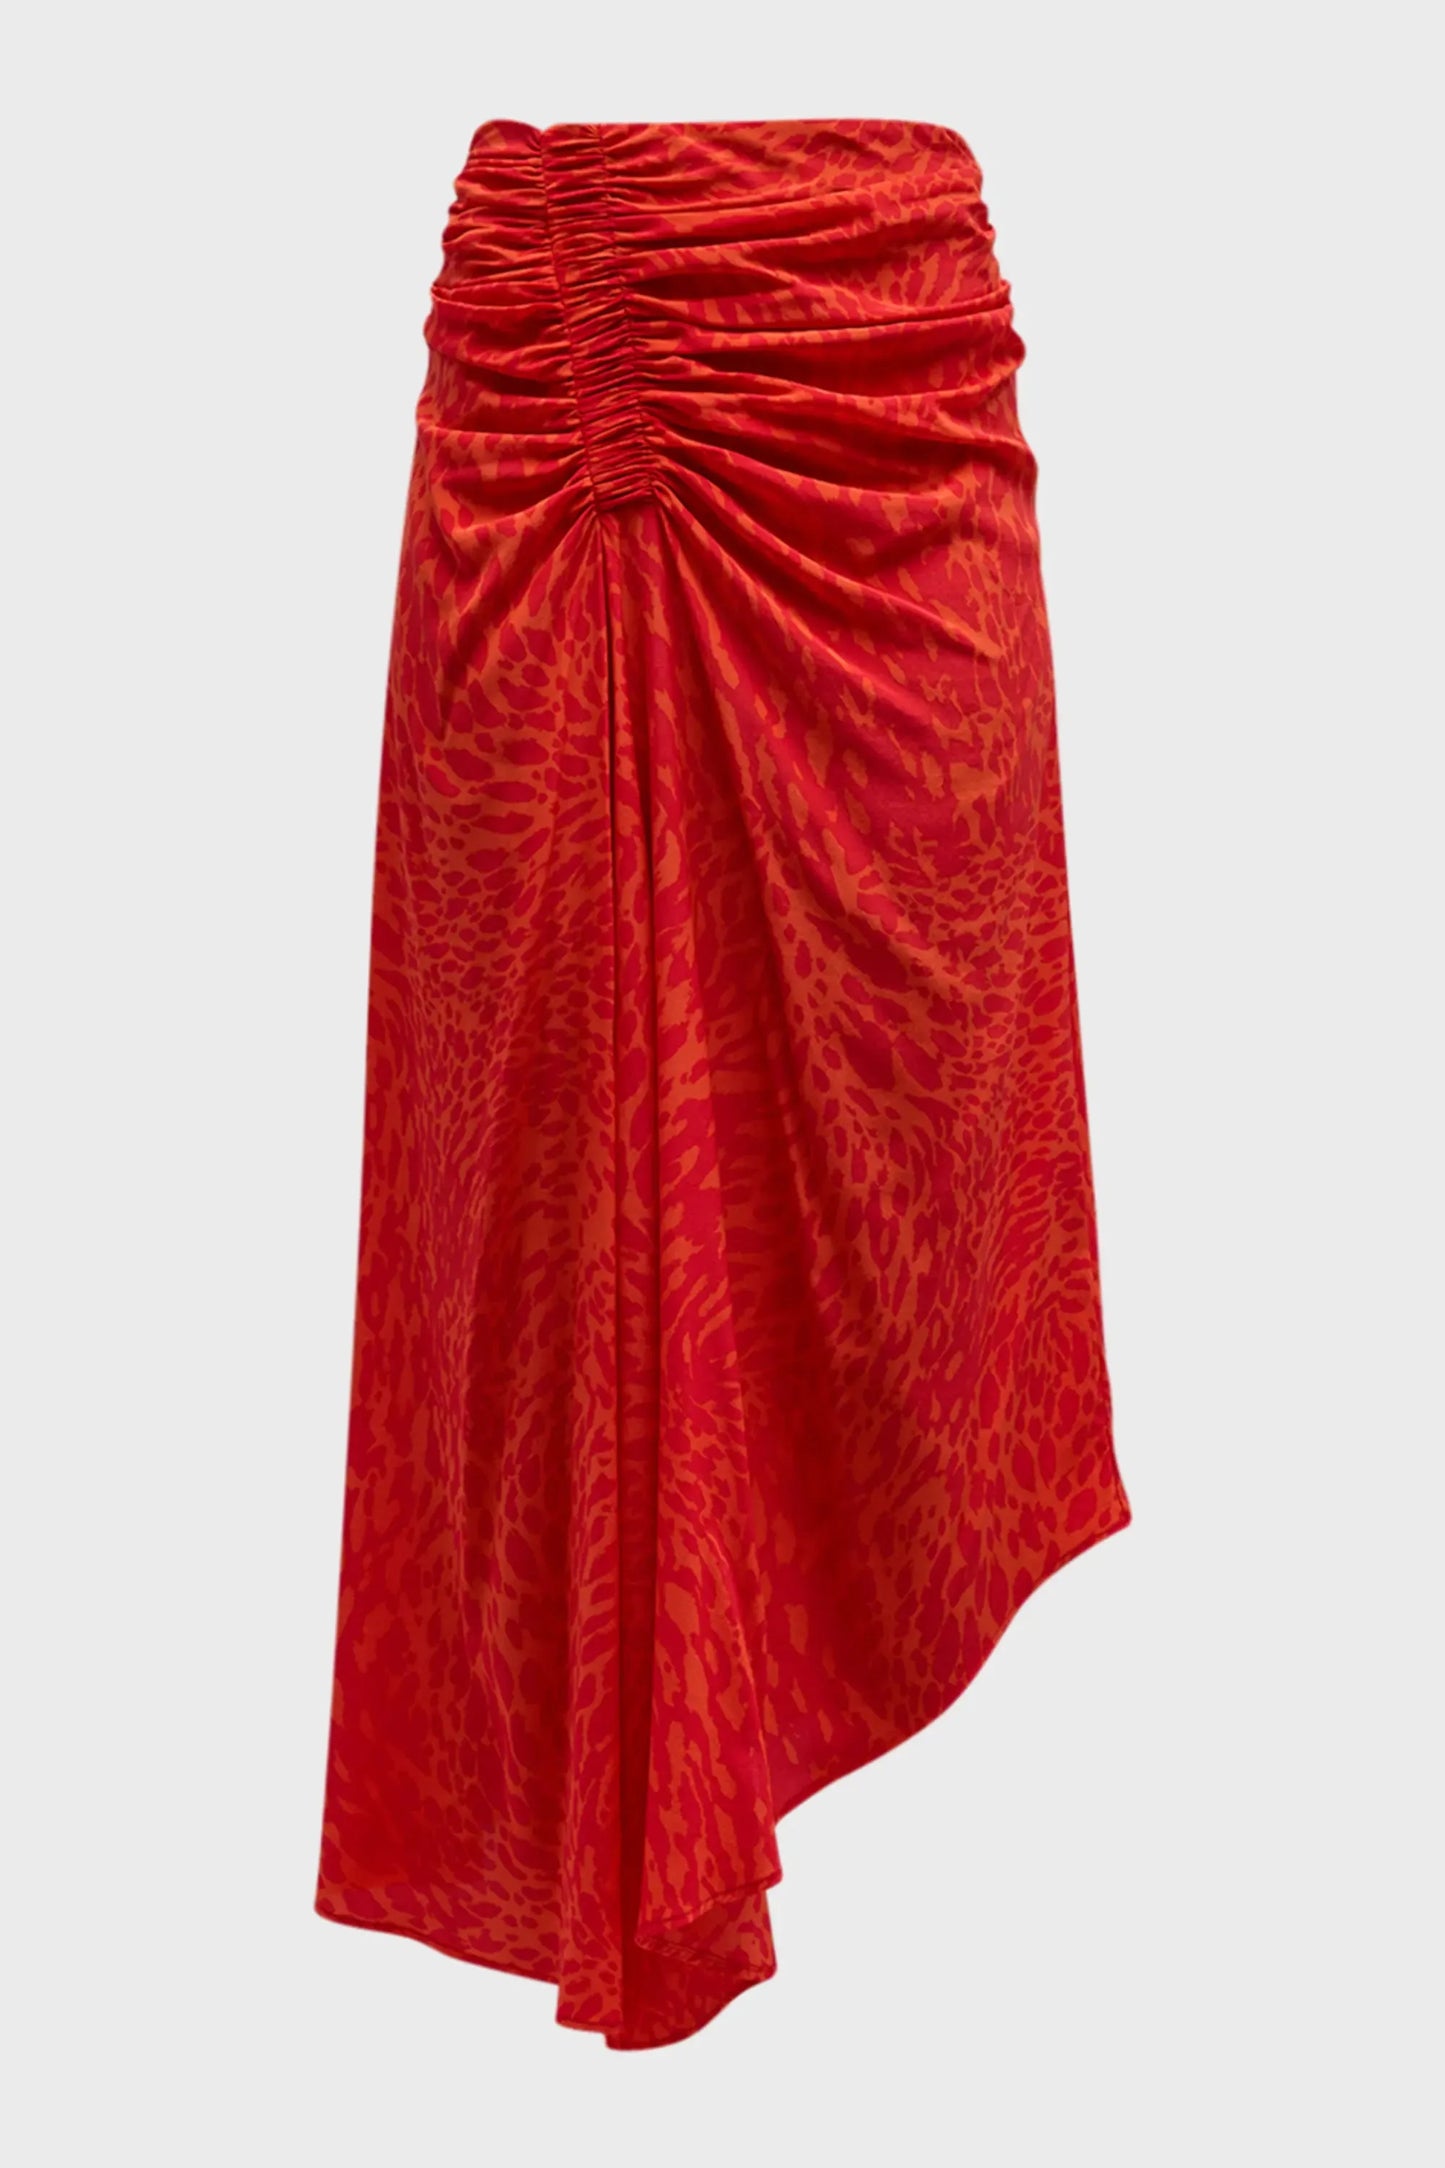 A.L.C. - Adeline Skirt in Vibrant Red